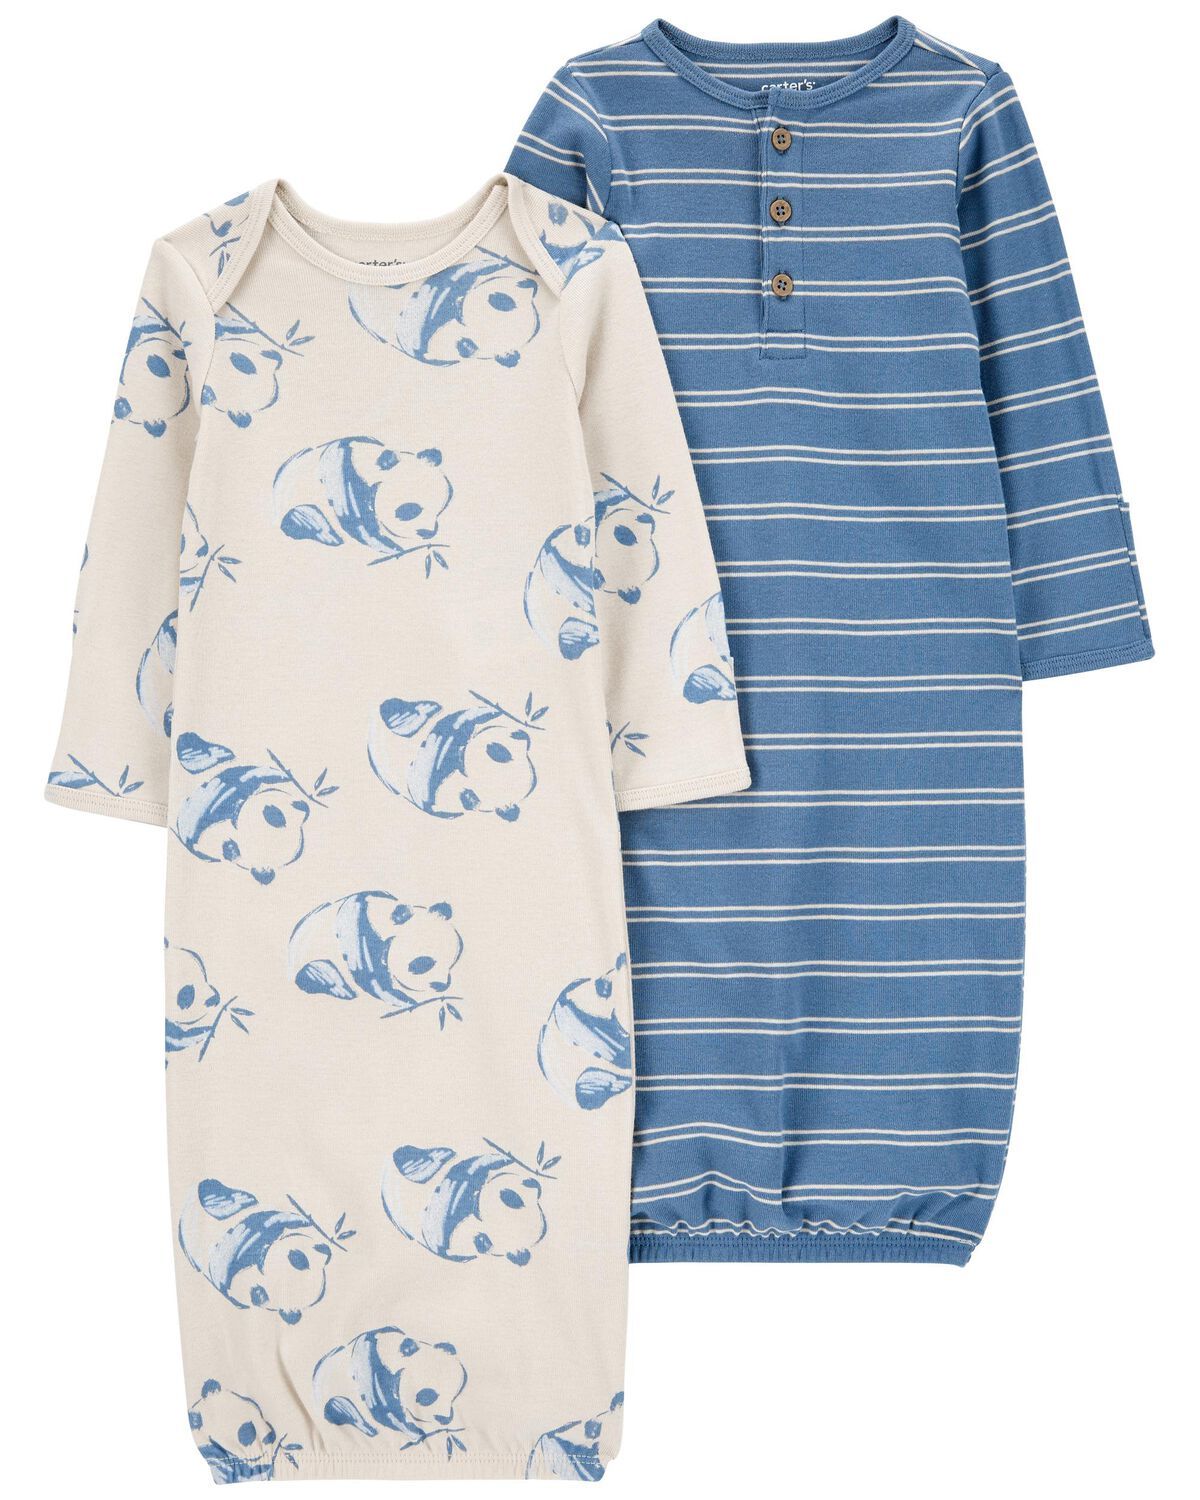 Blue/White Baby 2-Pack Sleeper Gowns | carters.com | Carter's